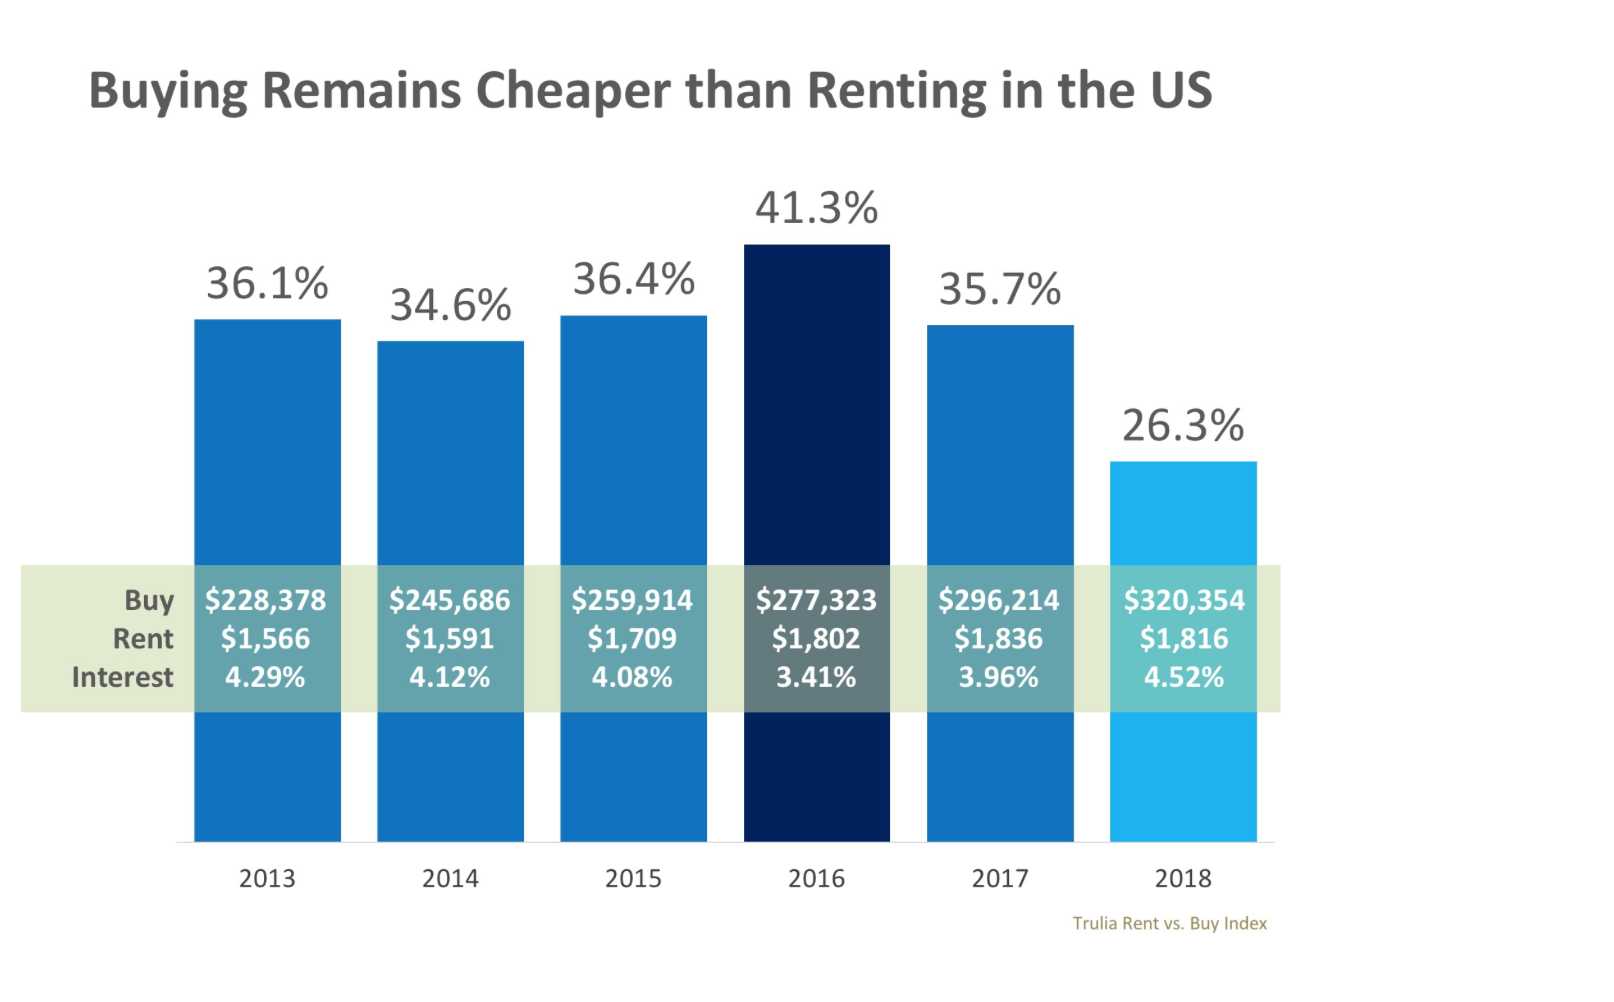 Buying 26.3% Cheaper than Renting in the US